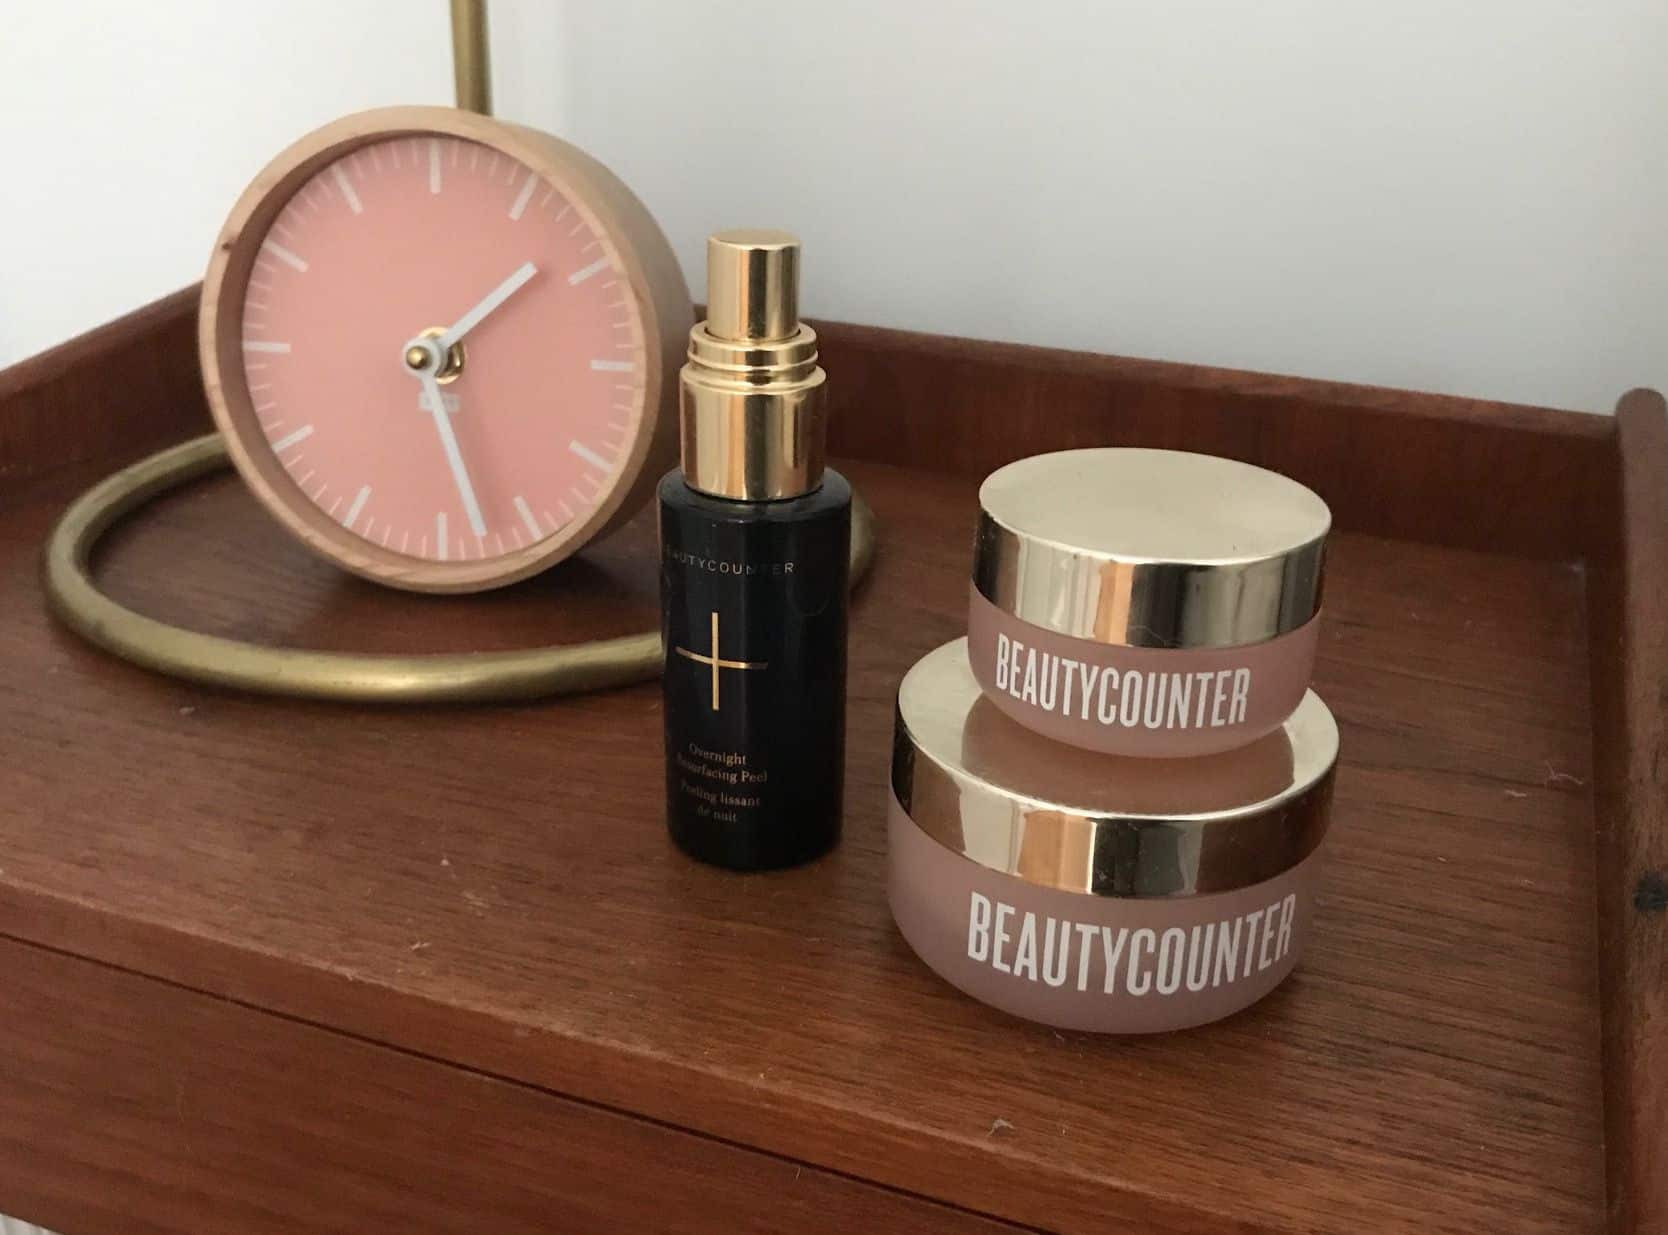 Honest Review of Beautycounter Anti-Aging Products